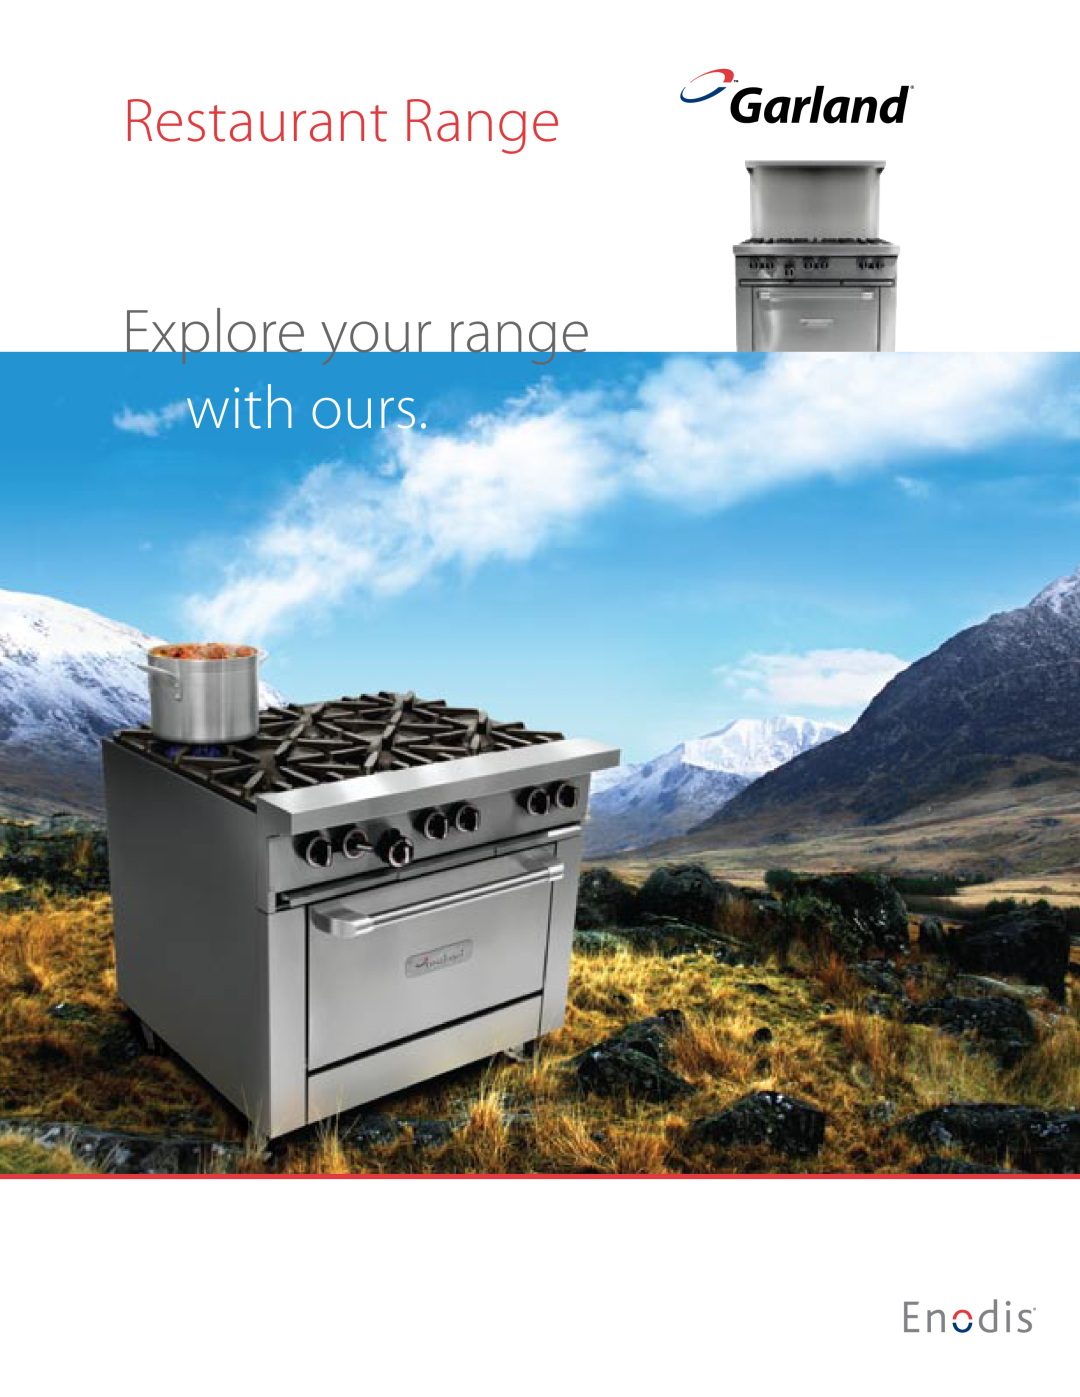 Garland TM manual Restaurant Range, Explore your range with ours, Garland 